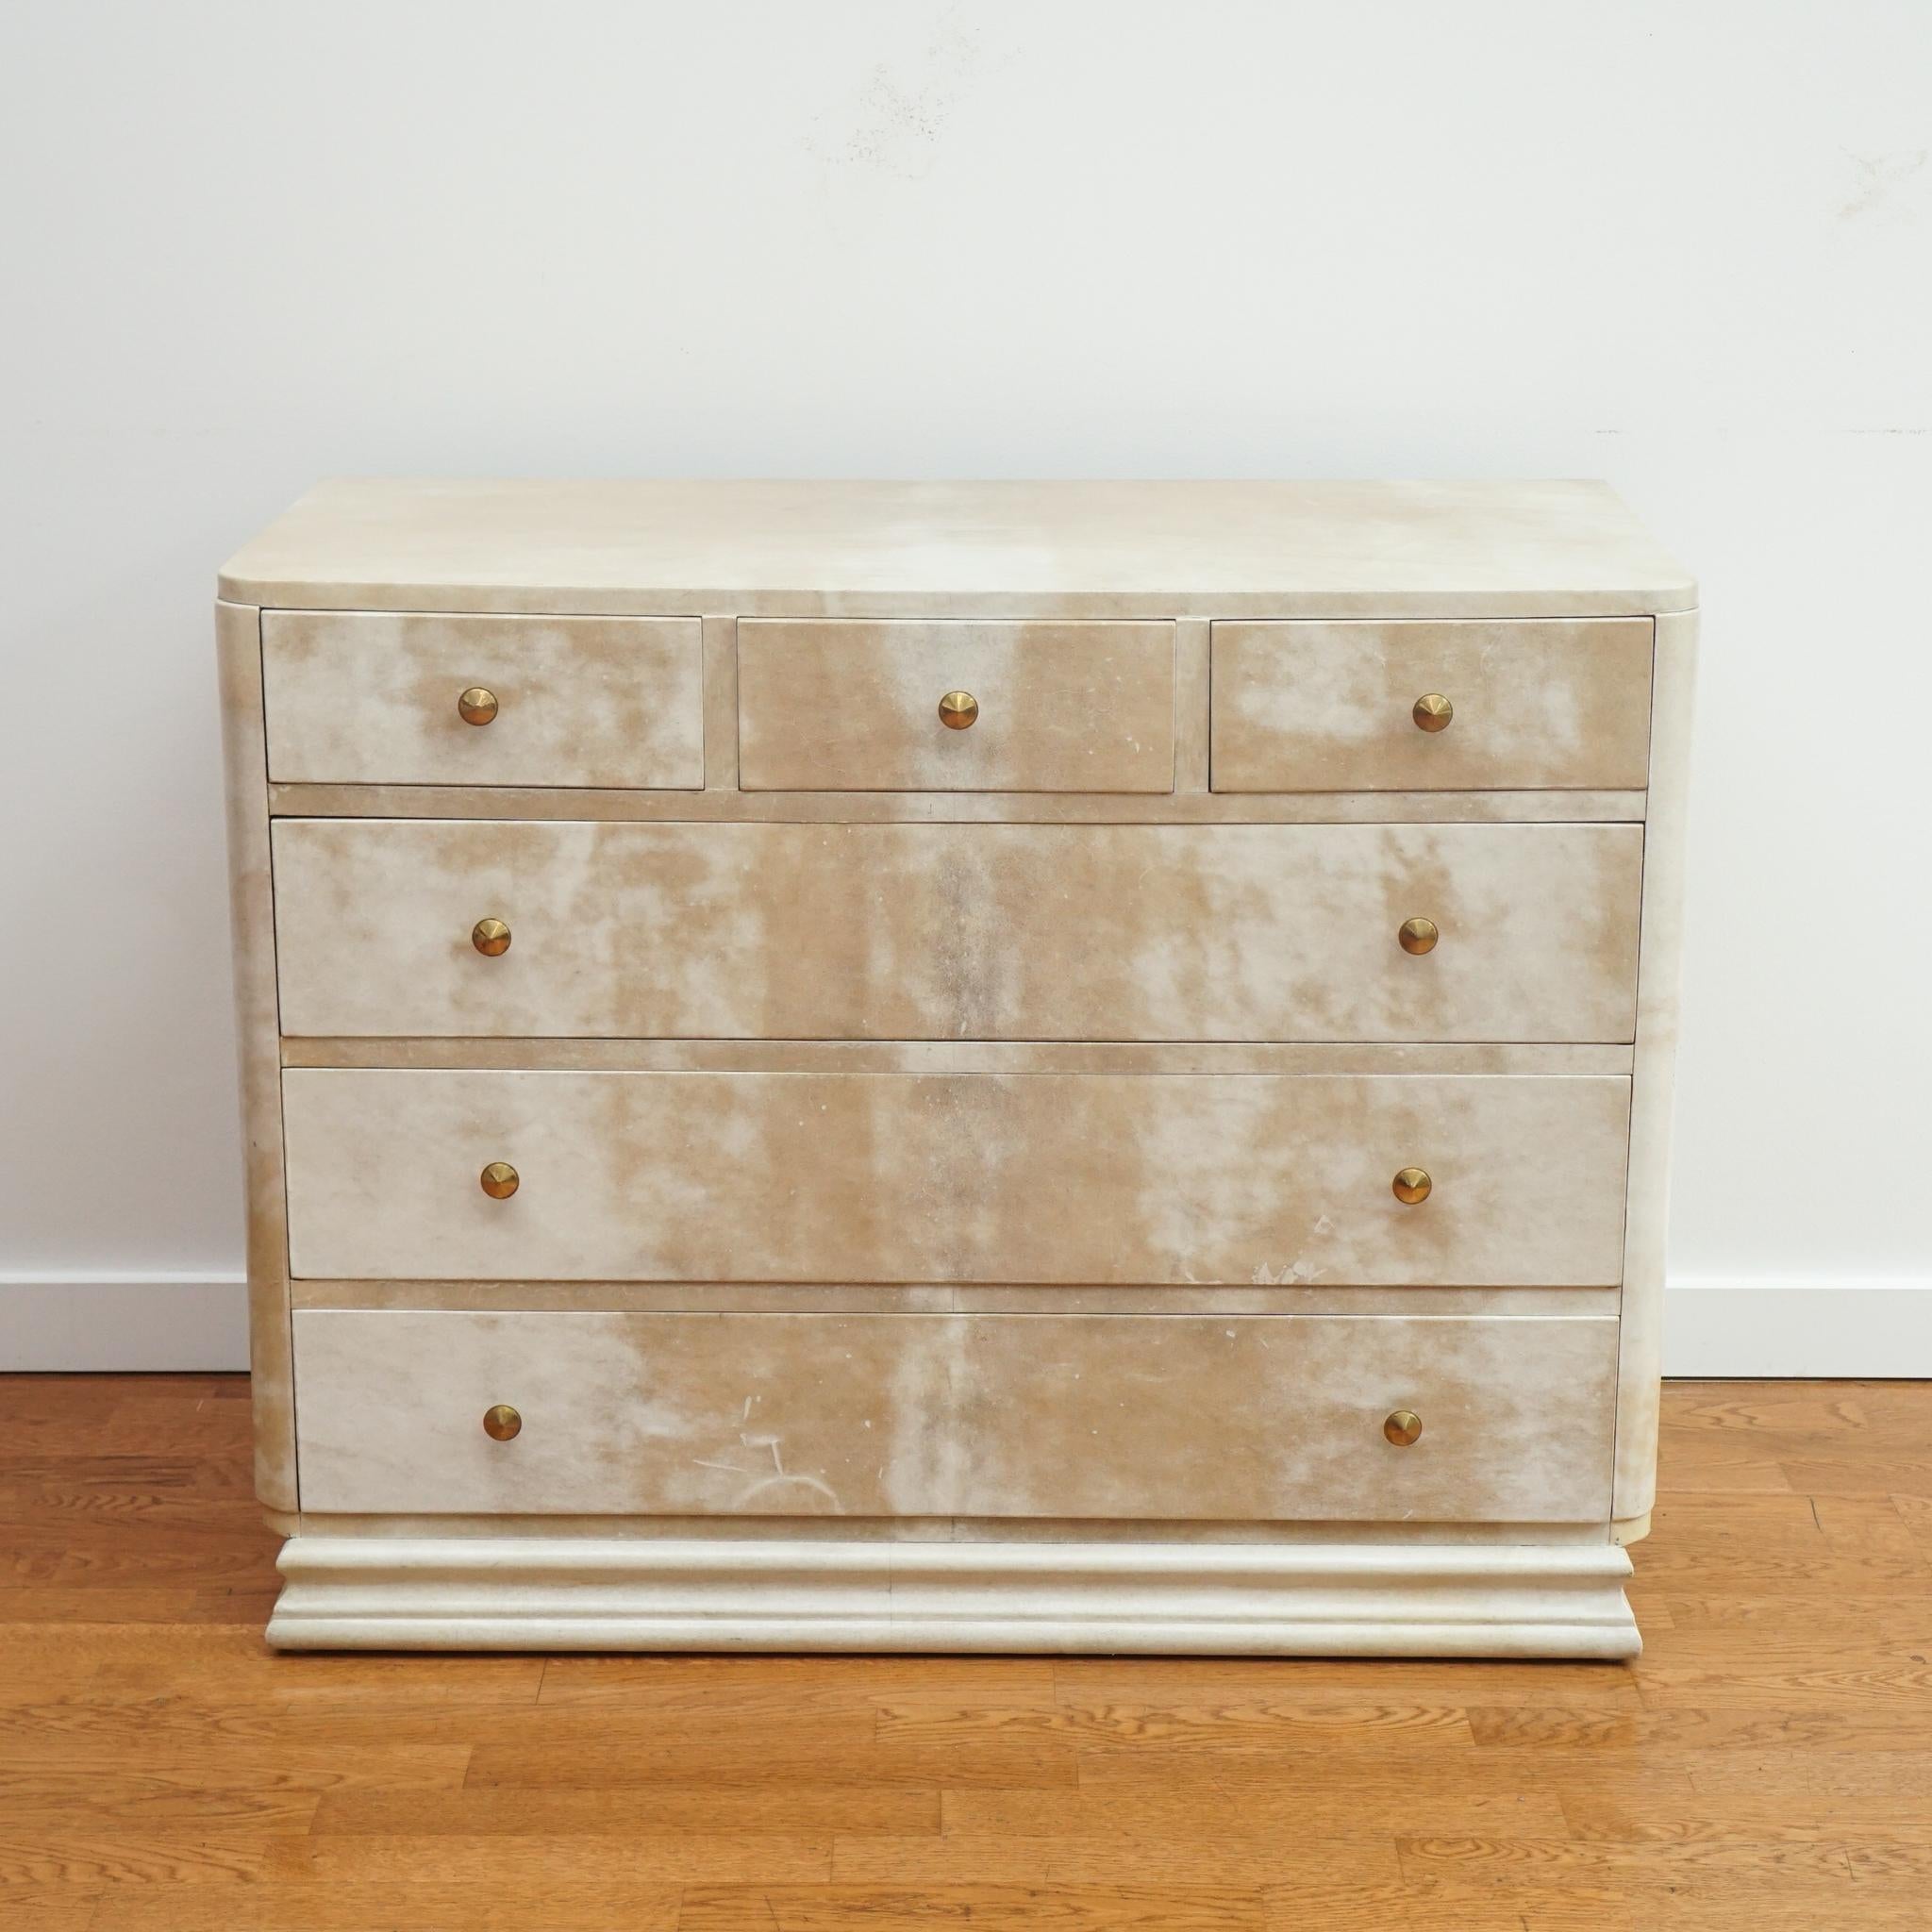 The French Art Deco dresser, shown here, is in the style of Samuel Marx and dates back to the 1940s.  Featuring abundant drawer storage, the dresser is distinguished by its clean lines, gently rounded corners and original parchment finish.  Simple